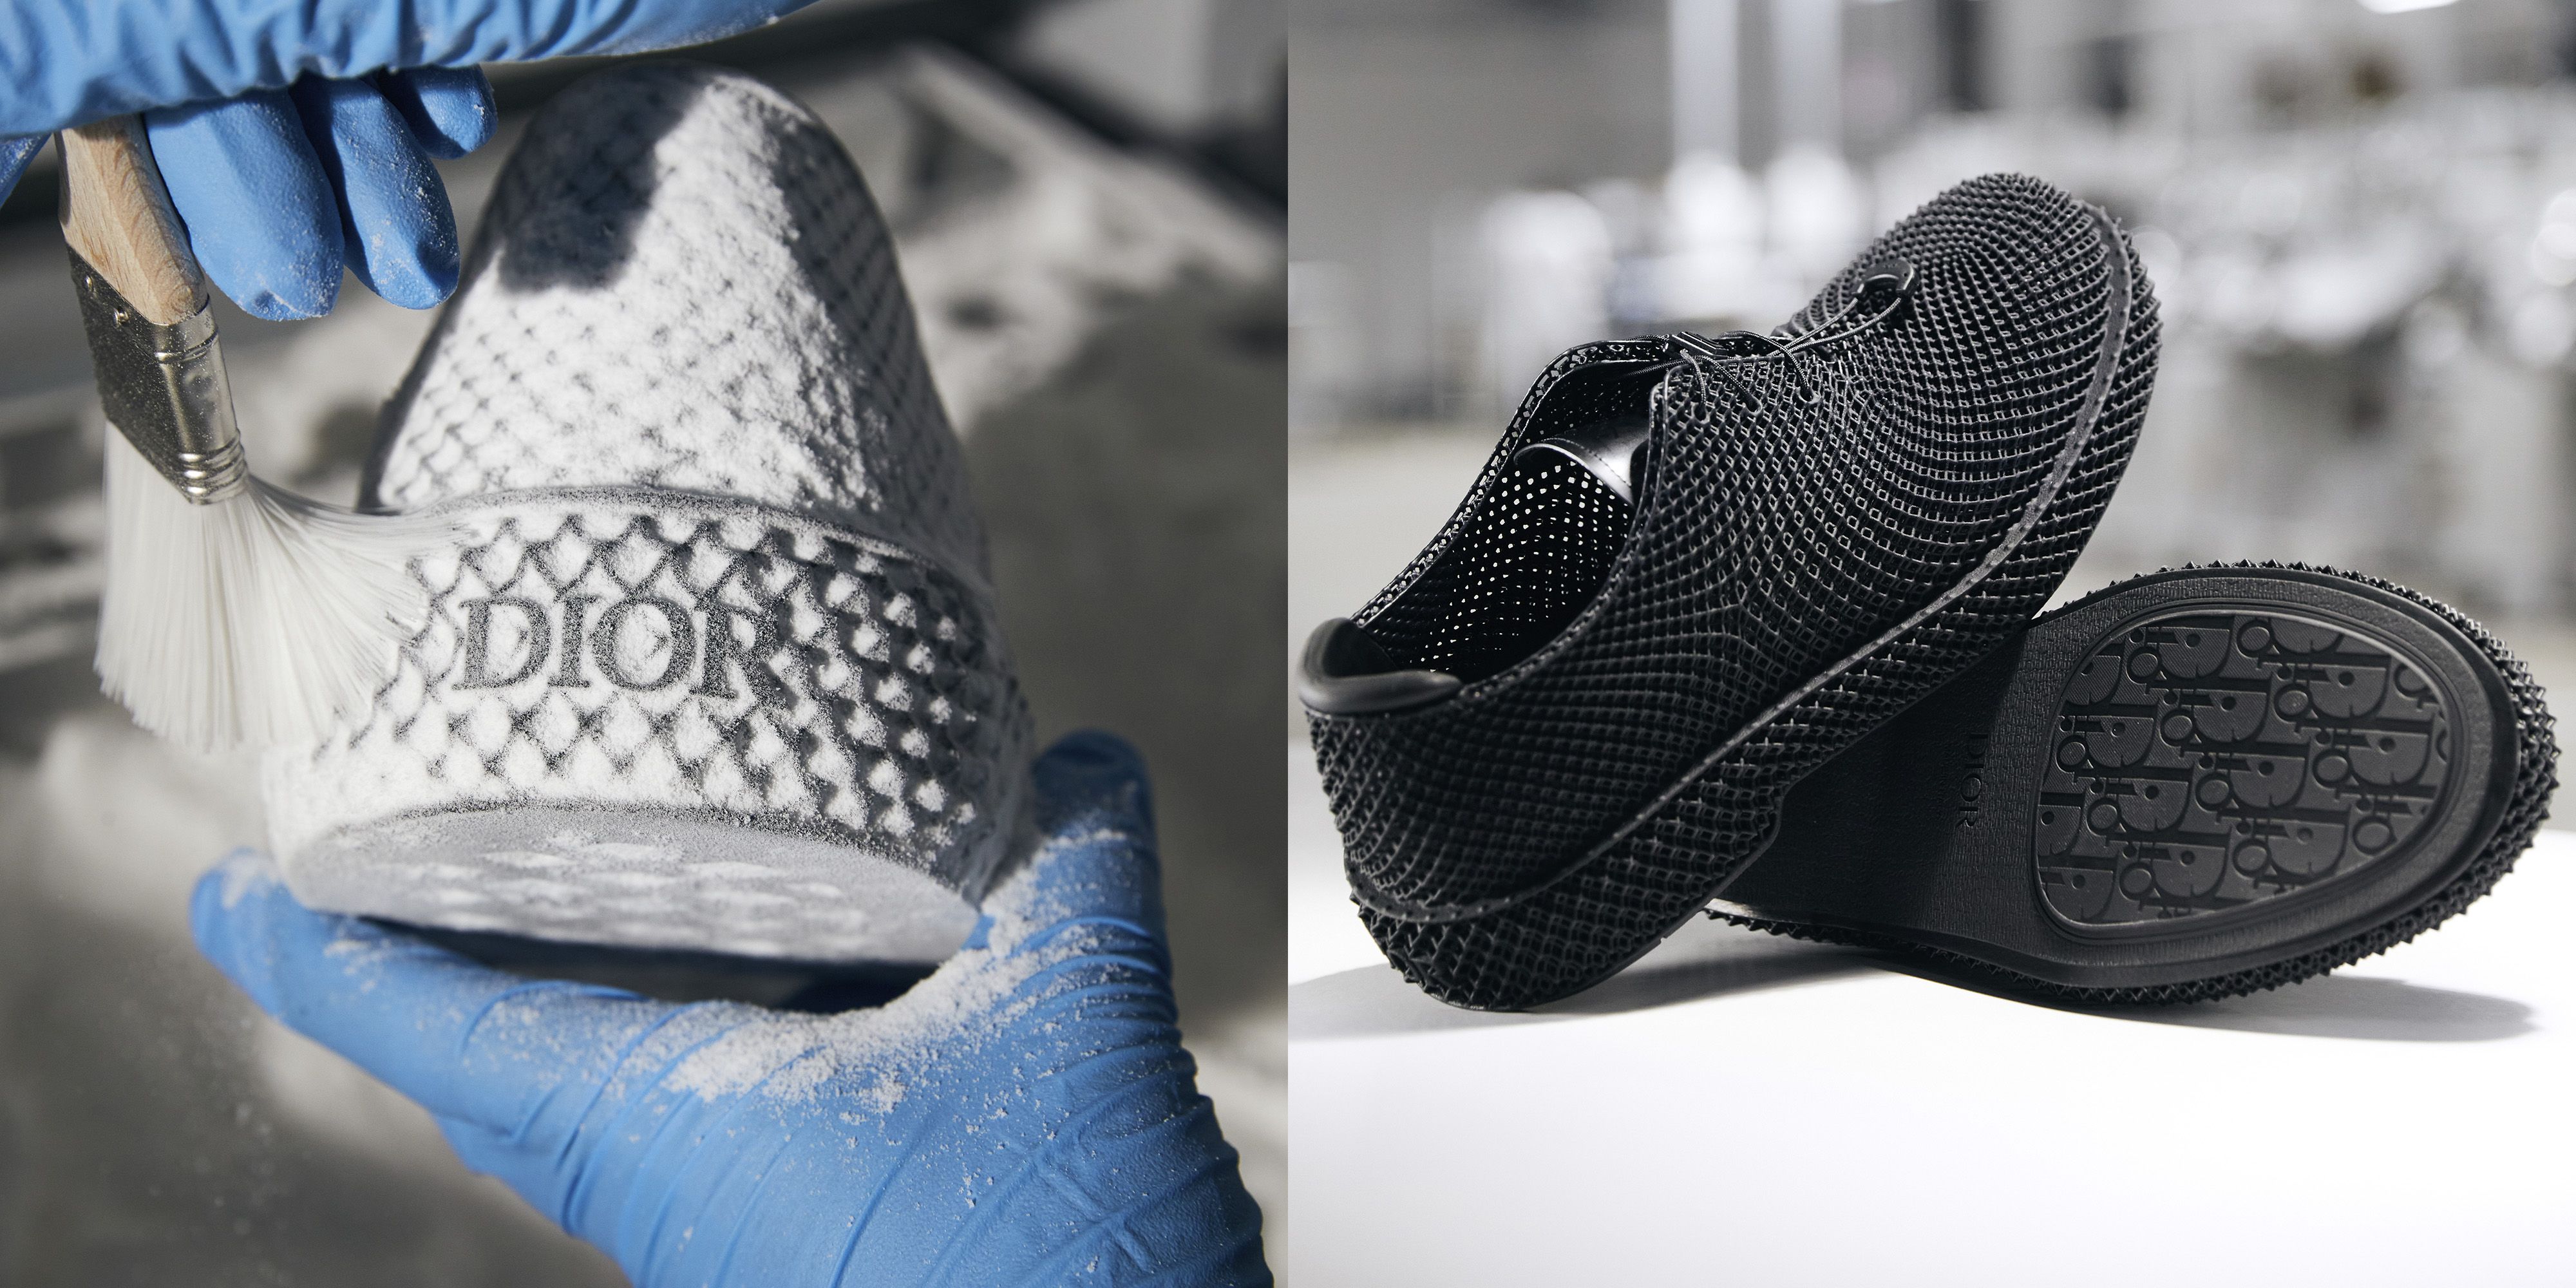 Heres How Dior Made its 3DPrinted Shoes